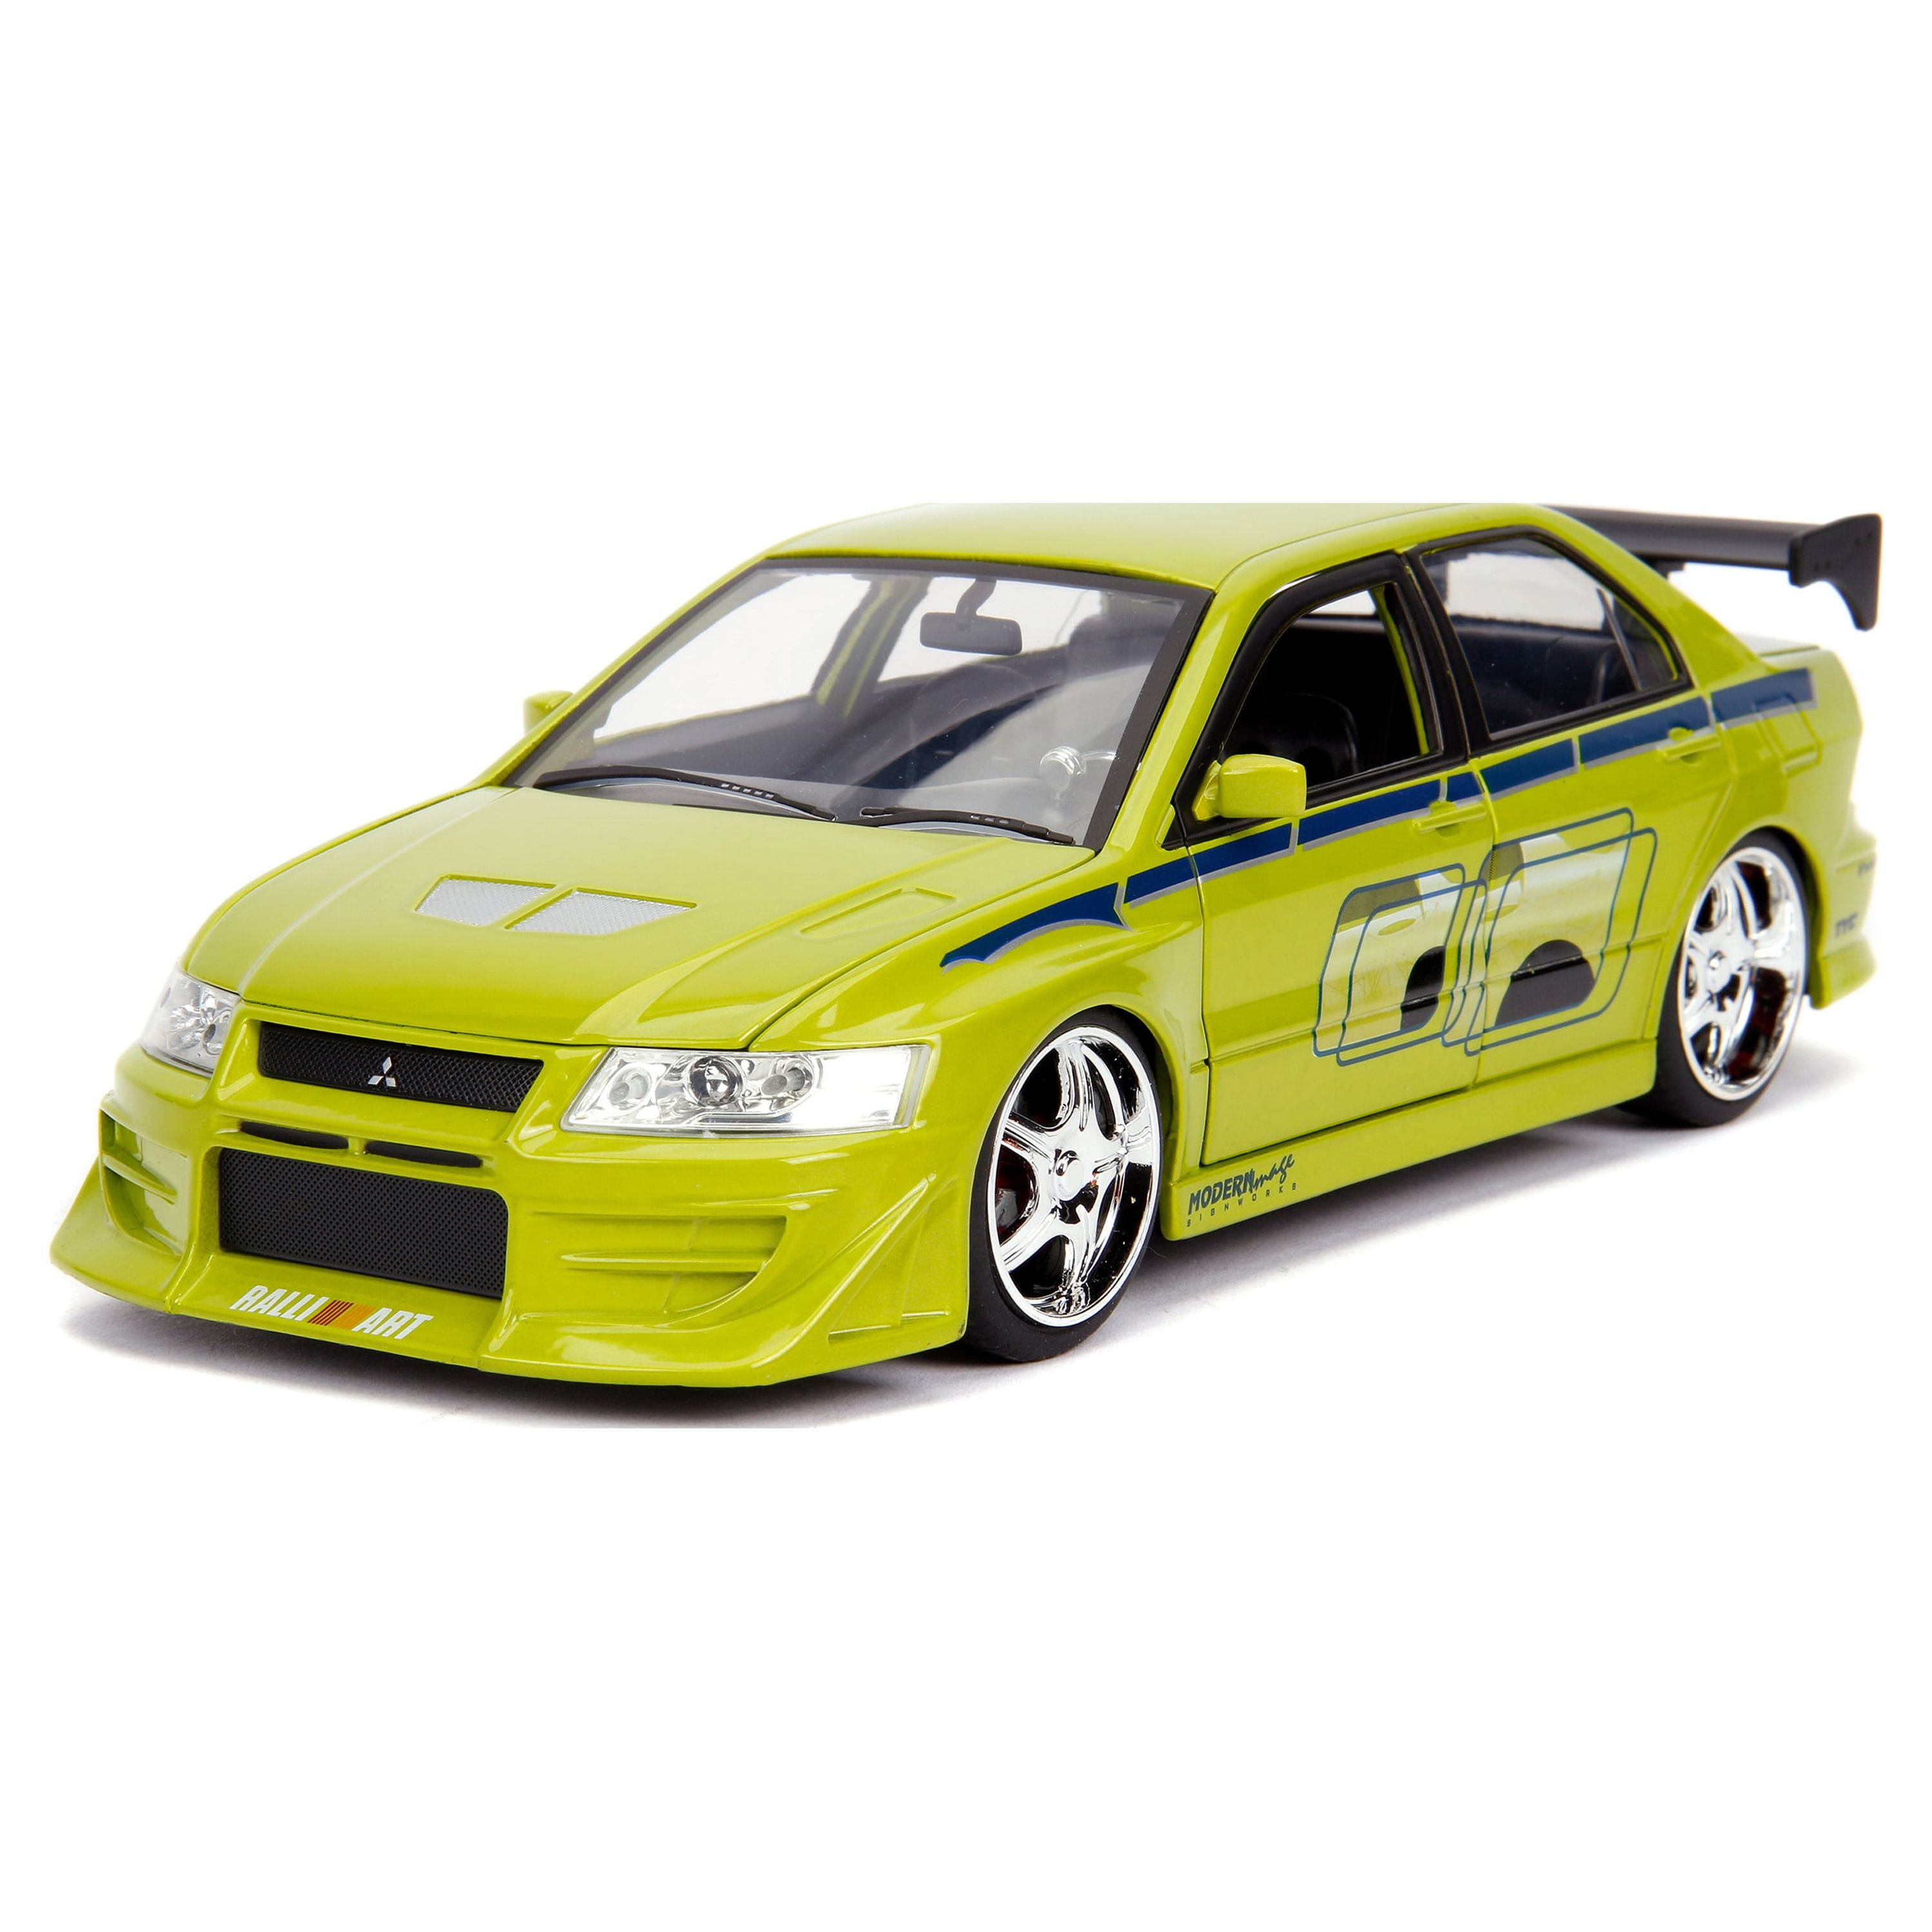 Brians Mitsubishi Lancer Evolution Vii The Fast And The Furious Movie 1 By 24 Diecast Model Car, Yellow